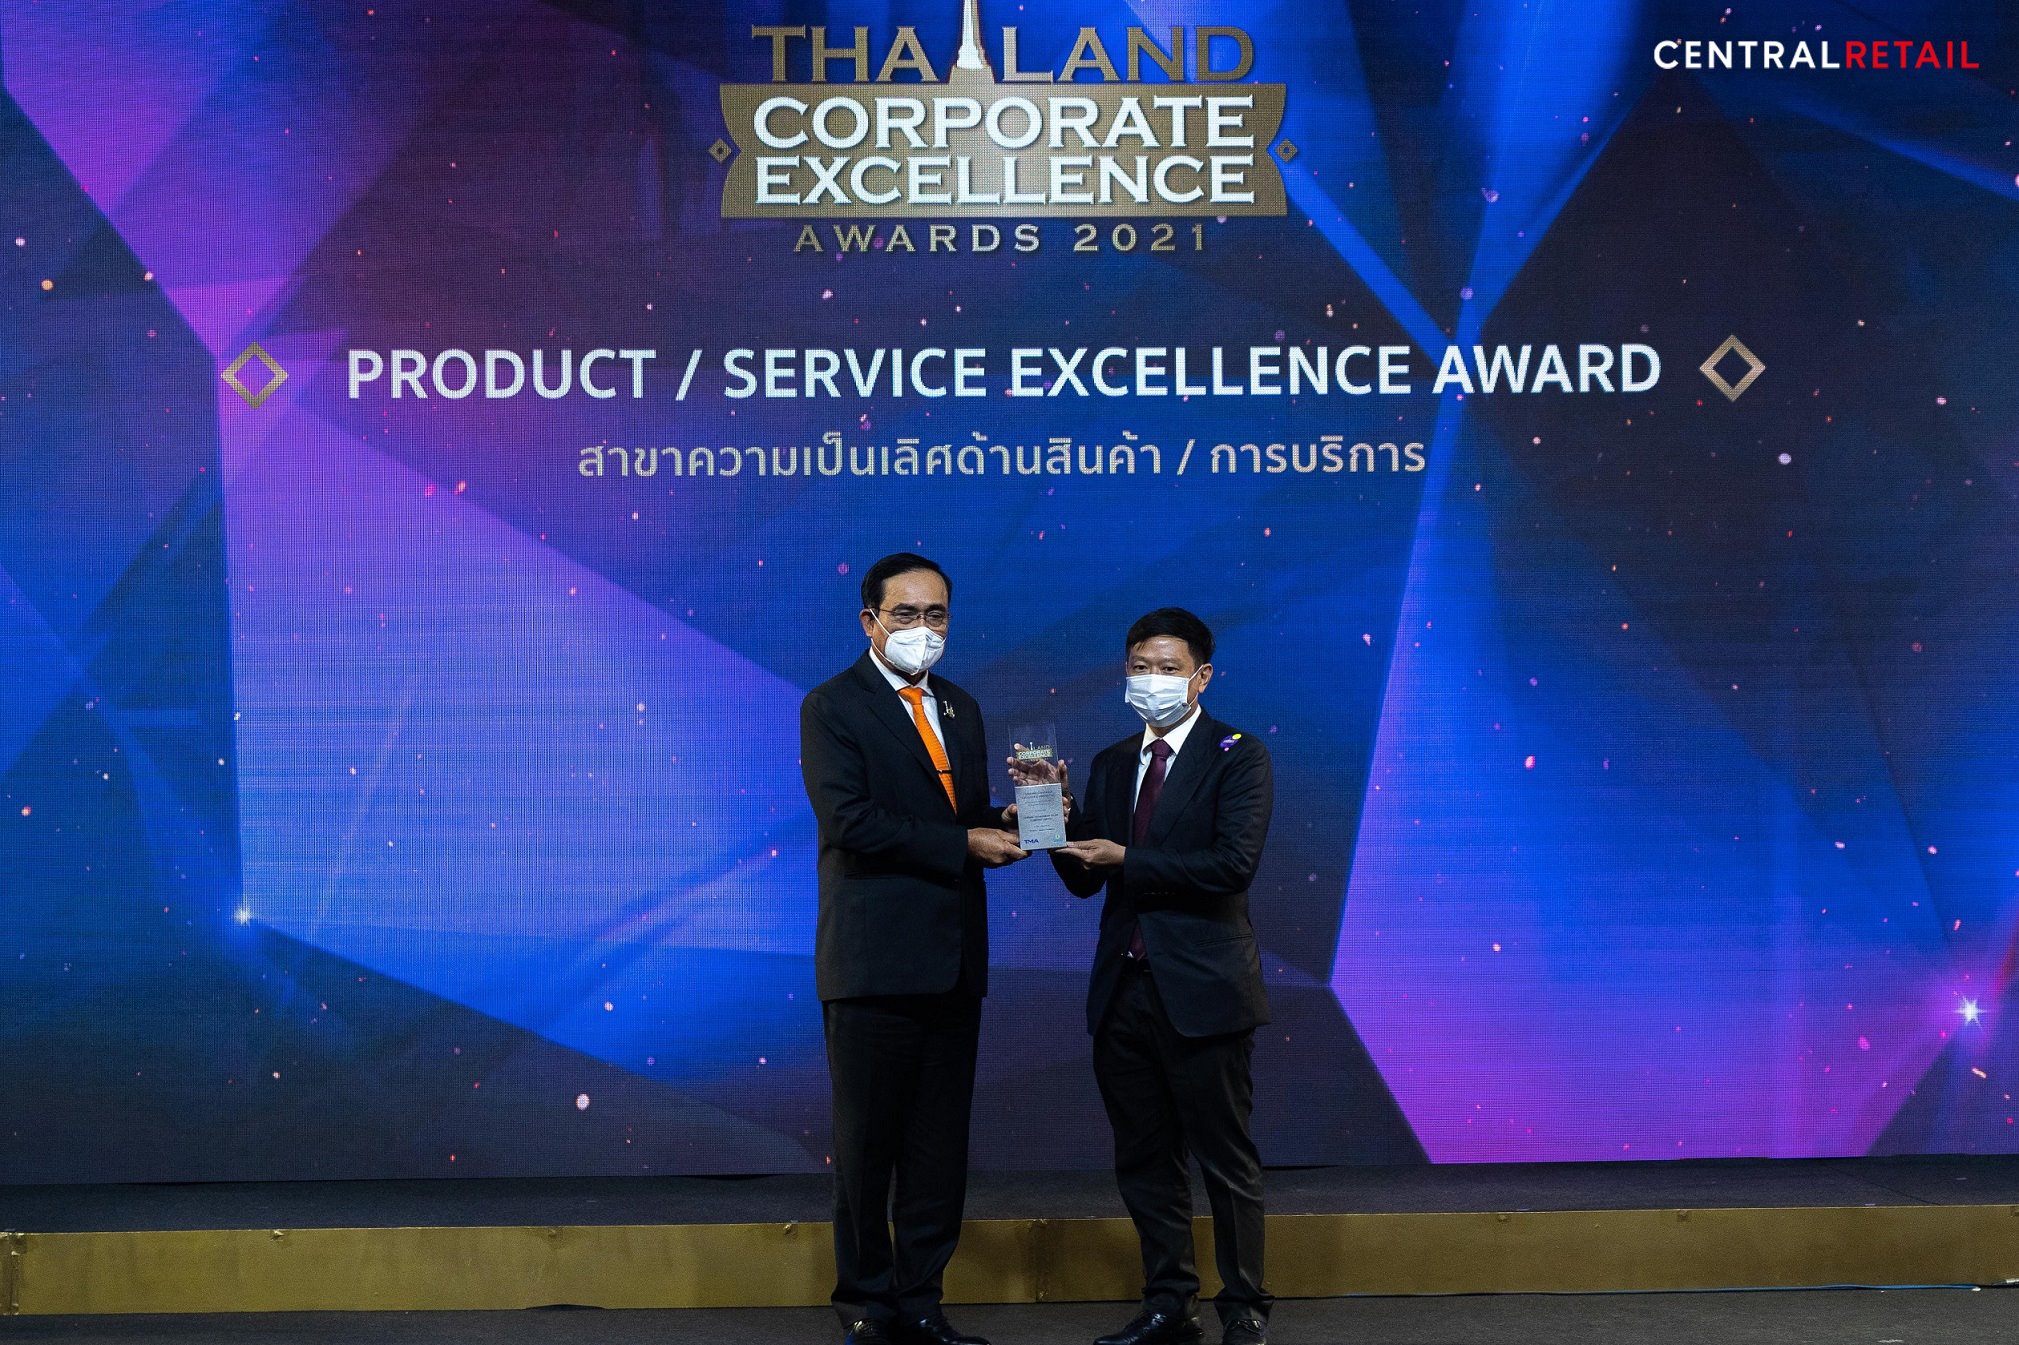 Thailand Corporate Excellence Awards 2021 (Product / Service Excellence)